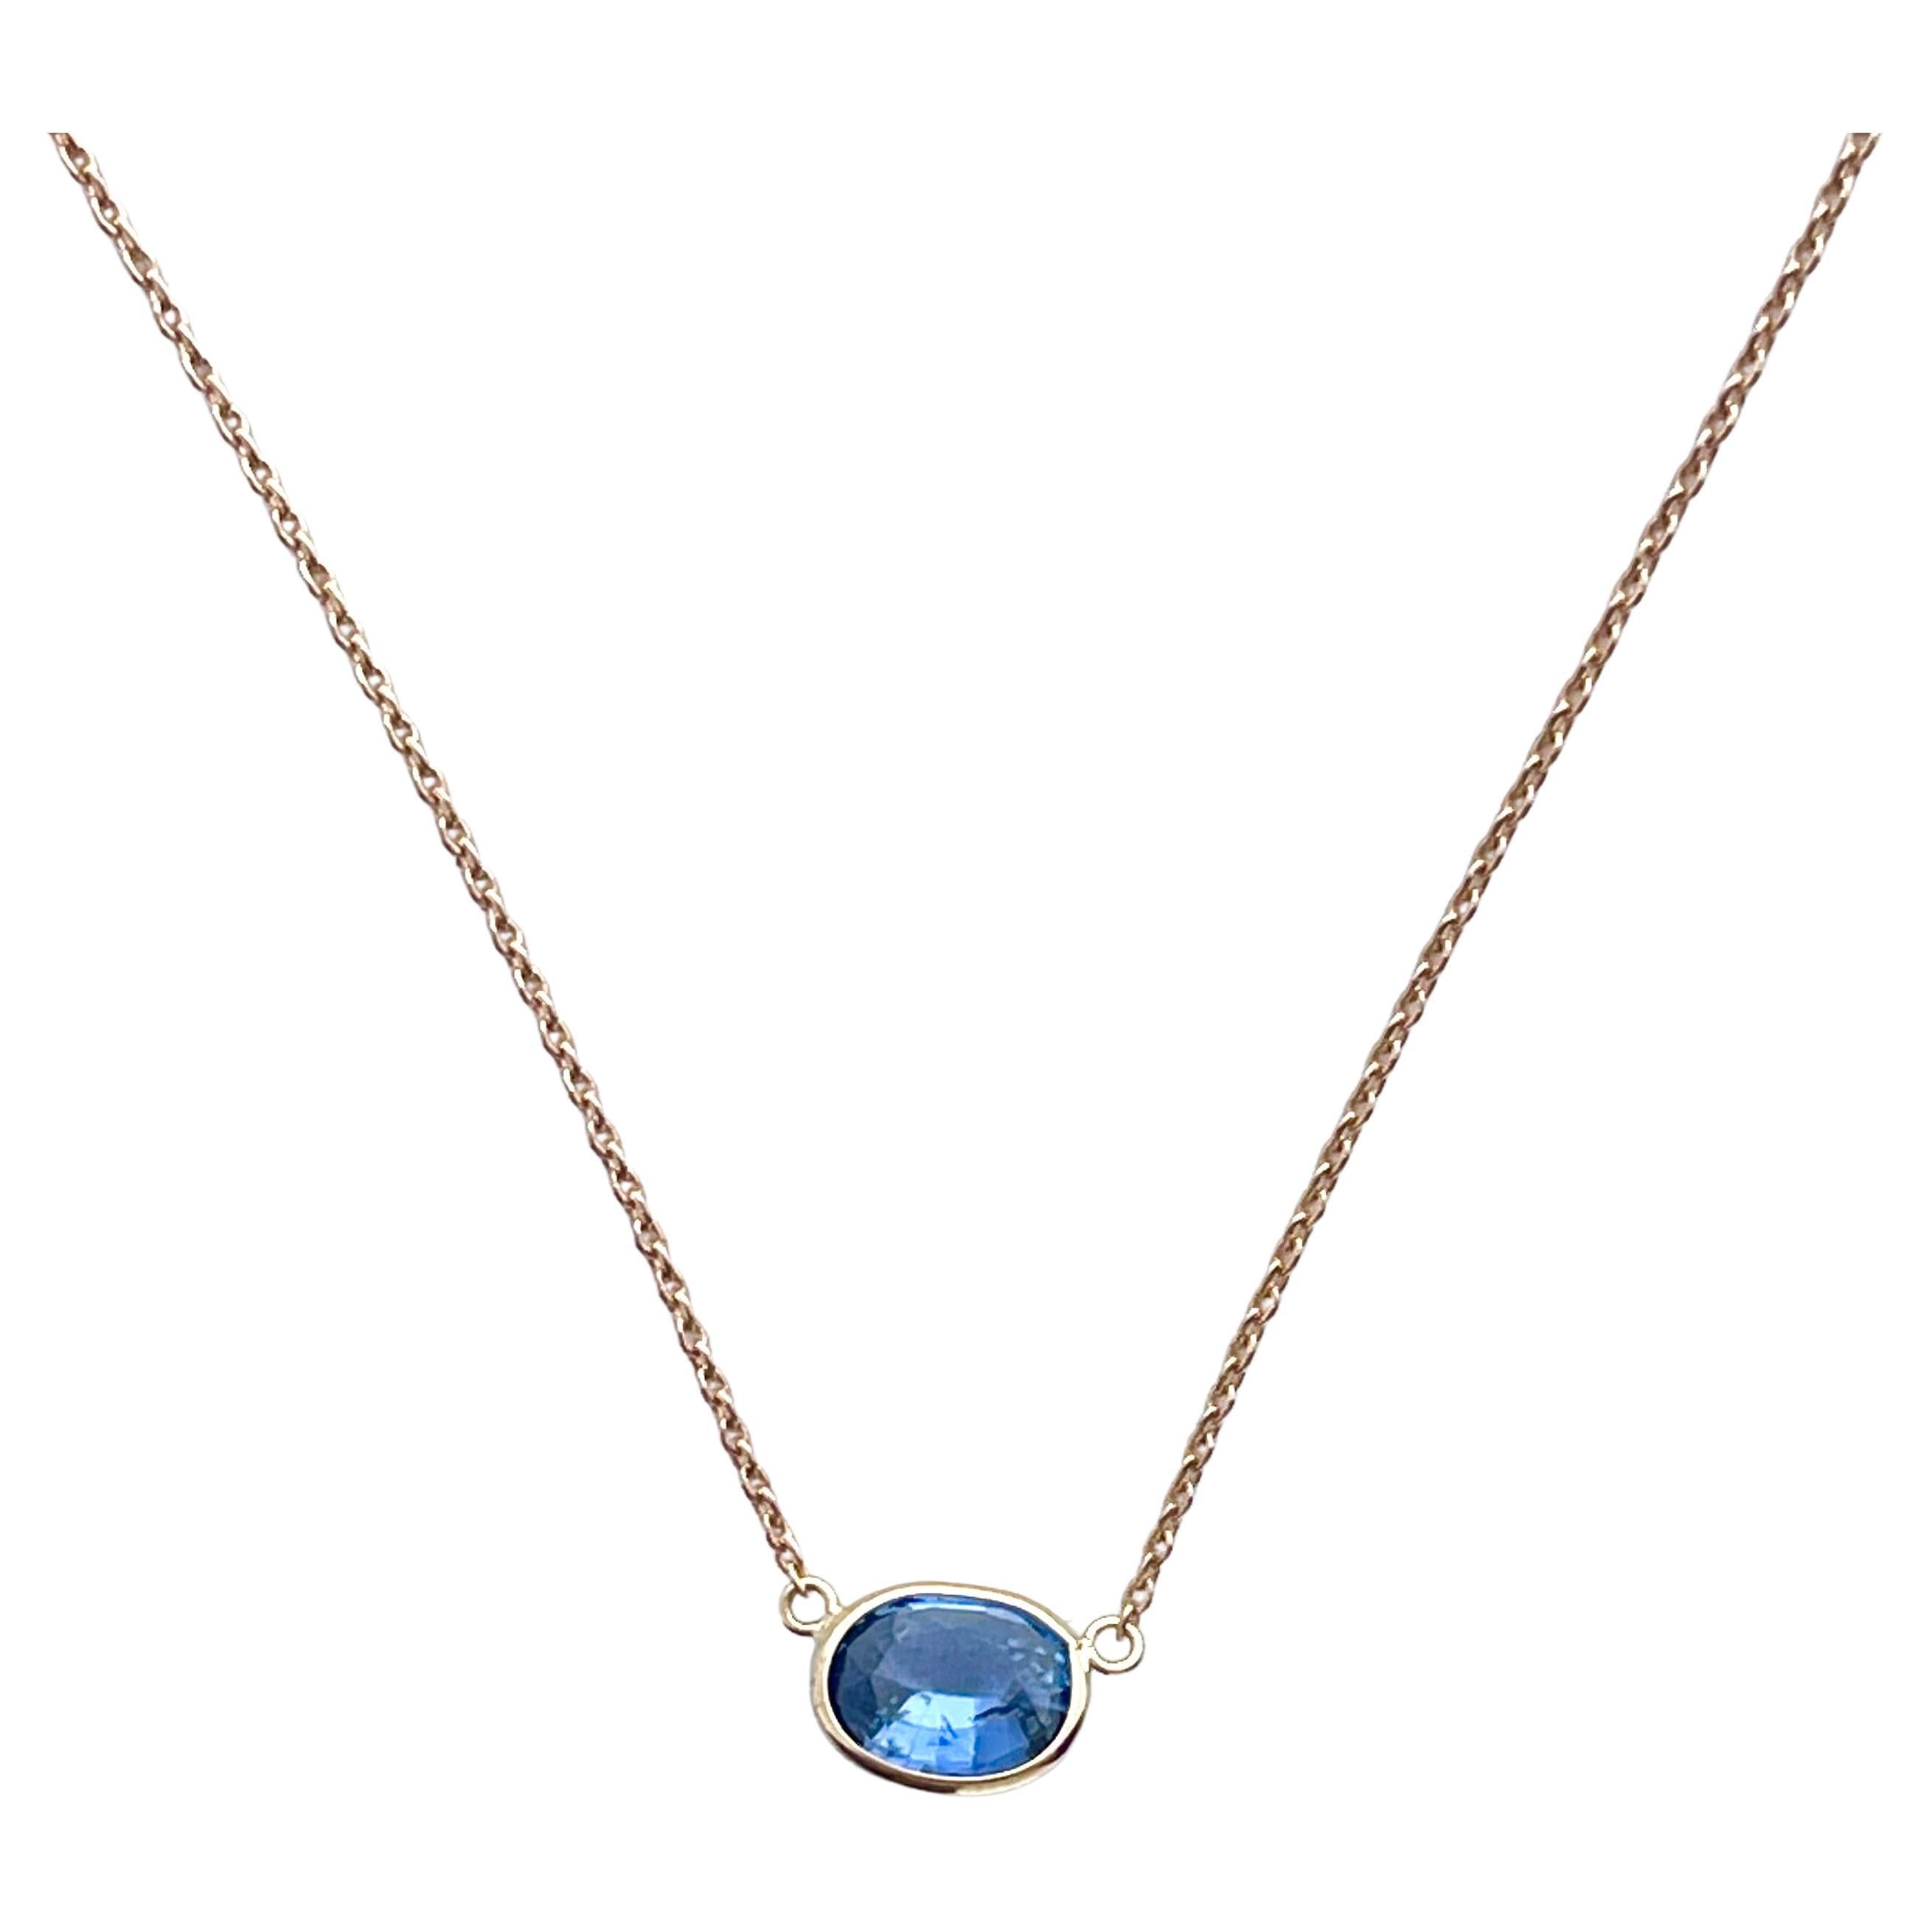 1.42 Carat Sapphire Blue Oval & Fashion Necklaces In 14K Rose Gold For Sale